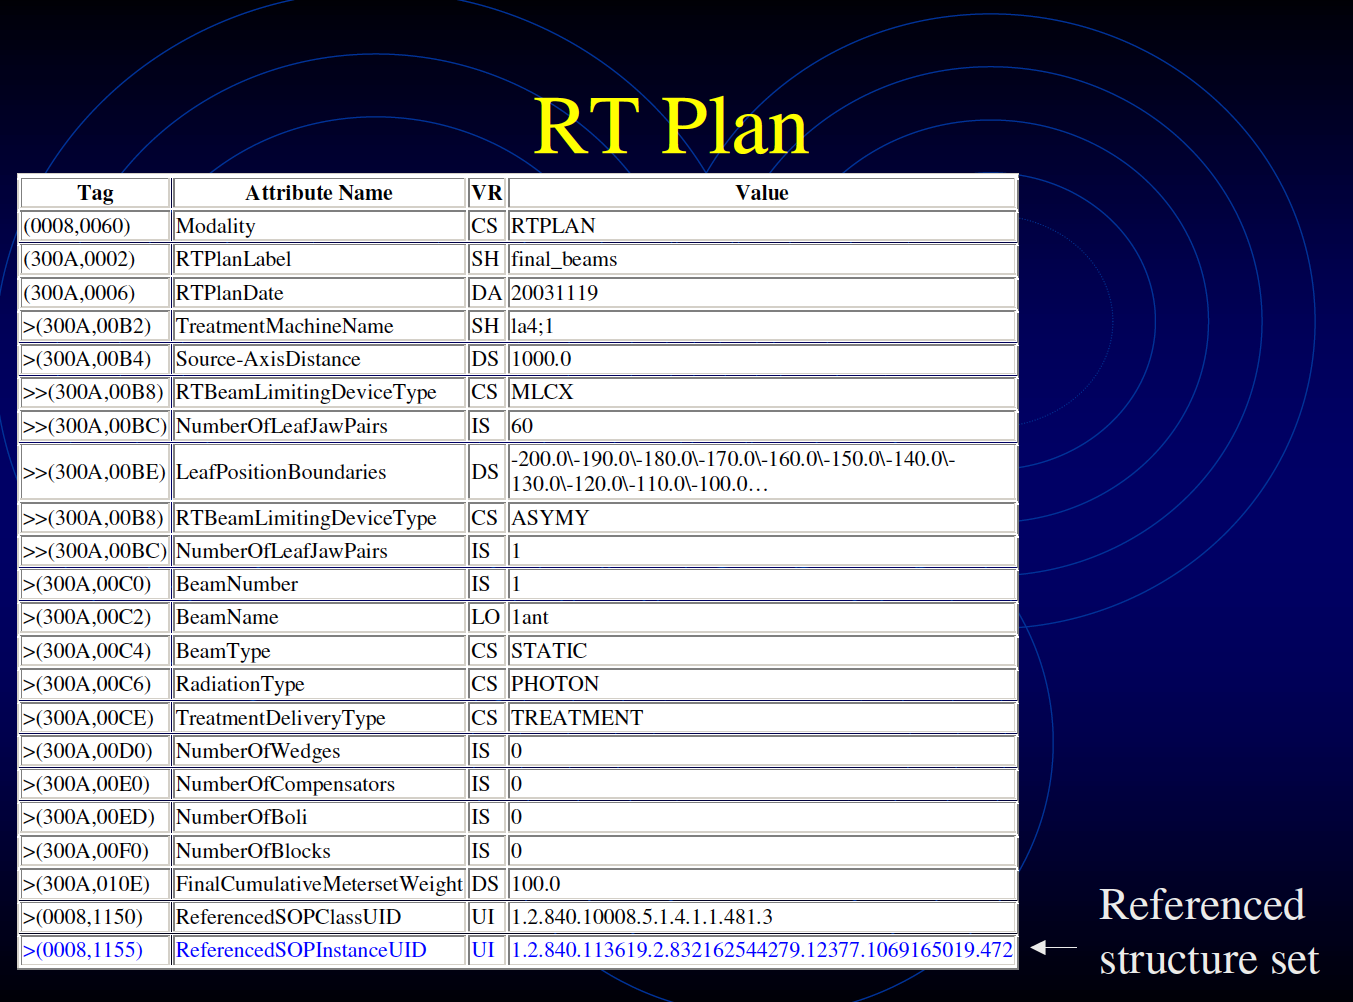 RT Plan structure